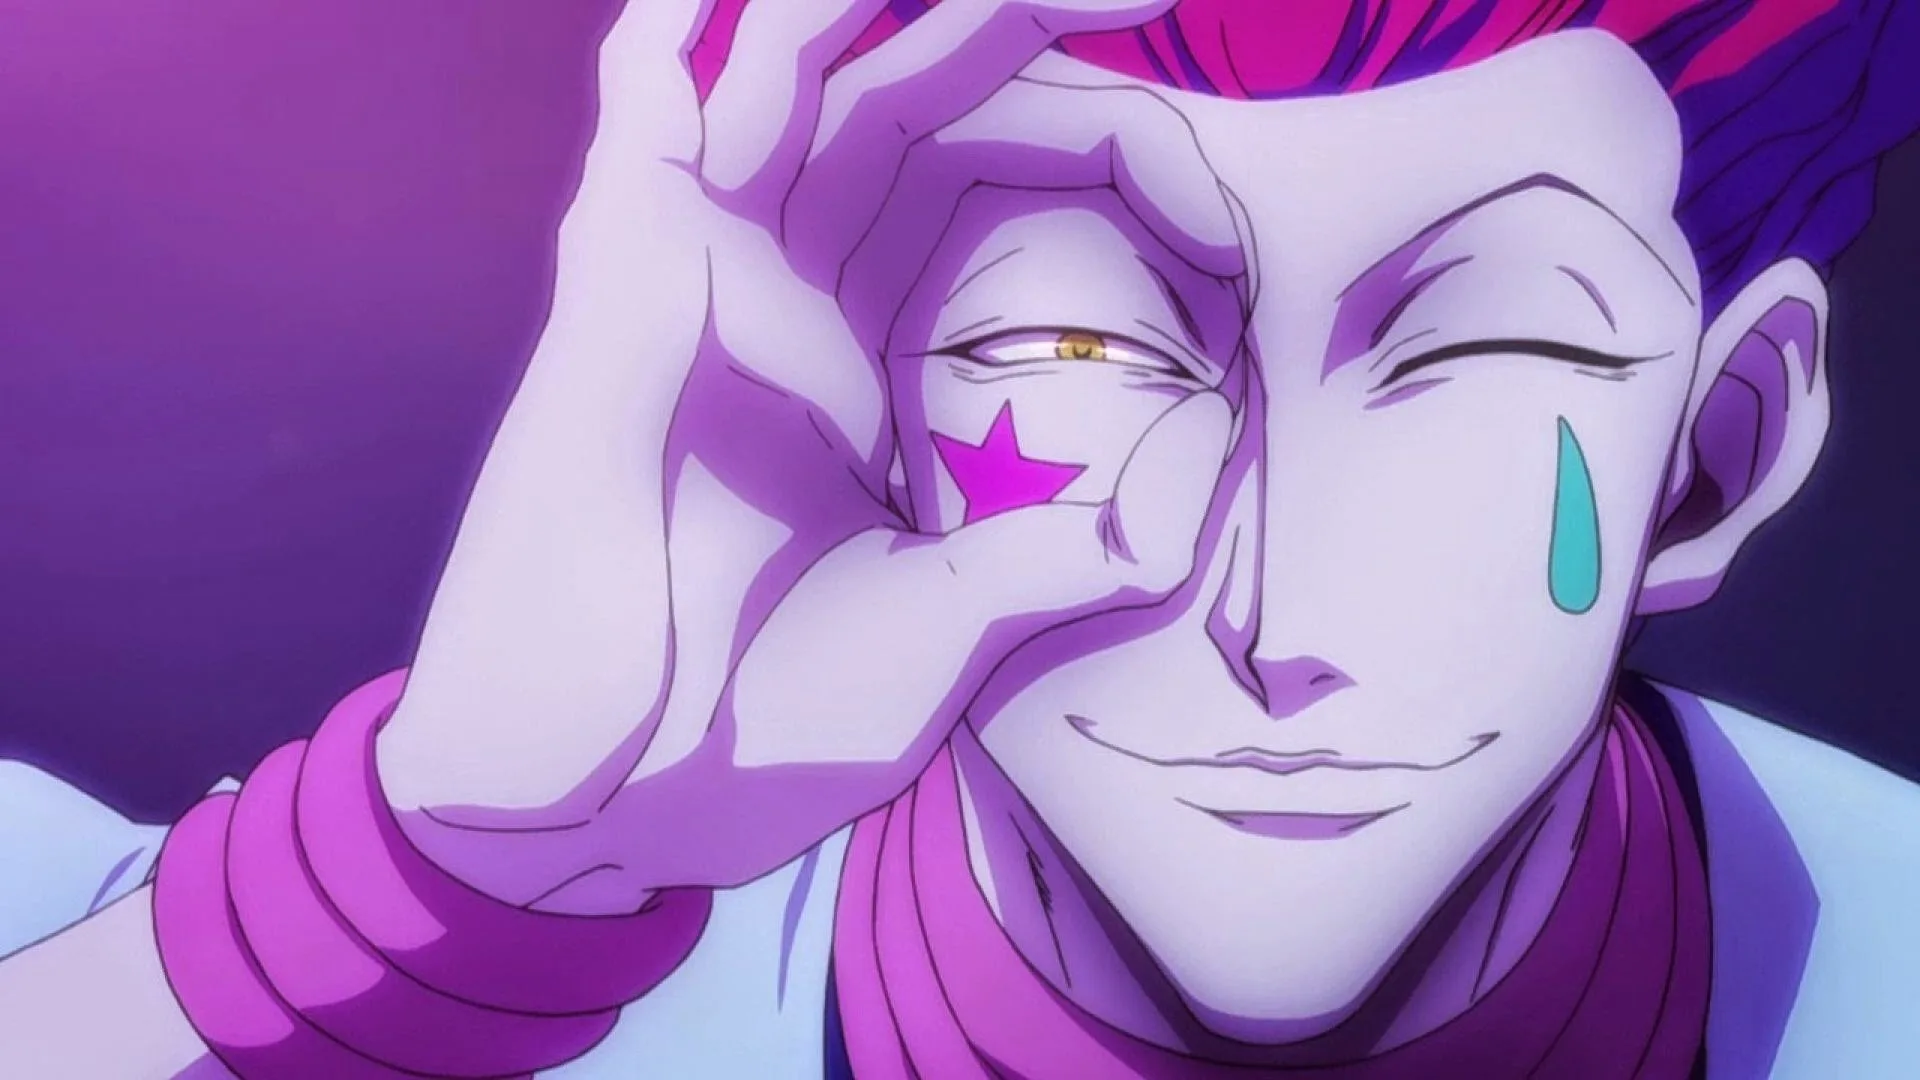 Hisoka has Nen skills that might confuse and deceive his adversaries. 